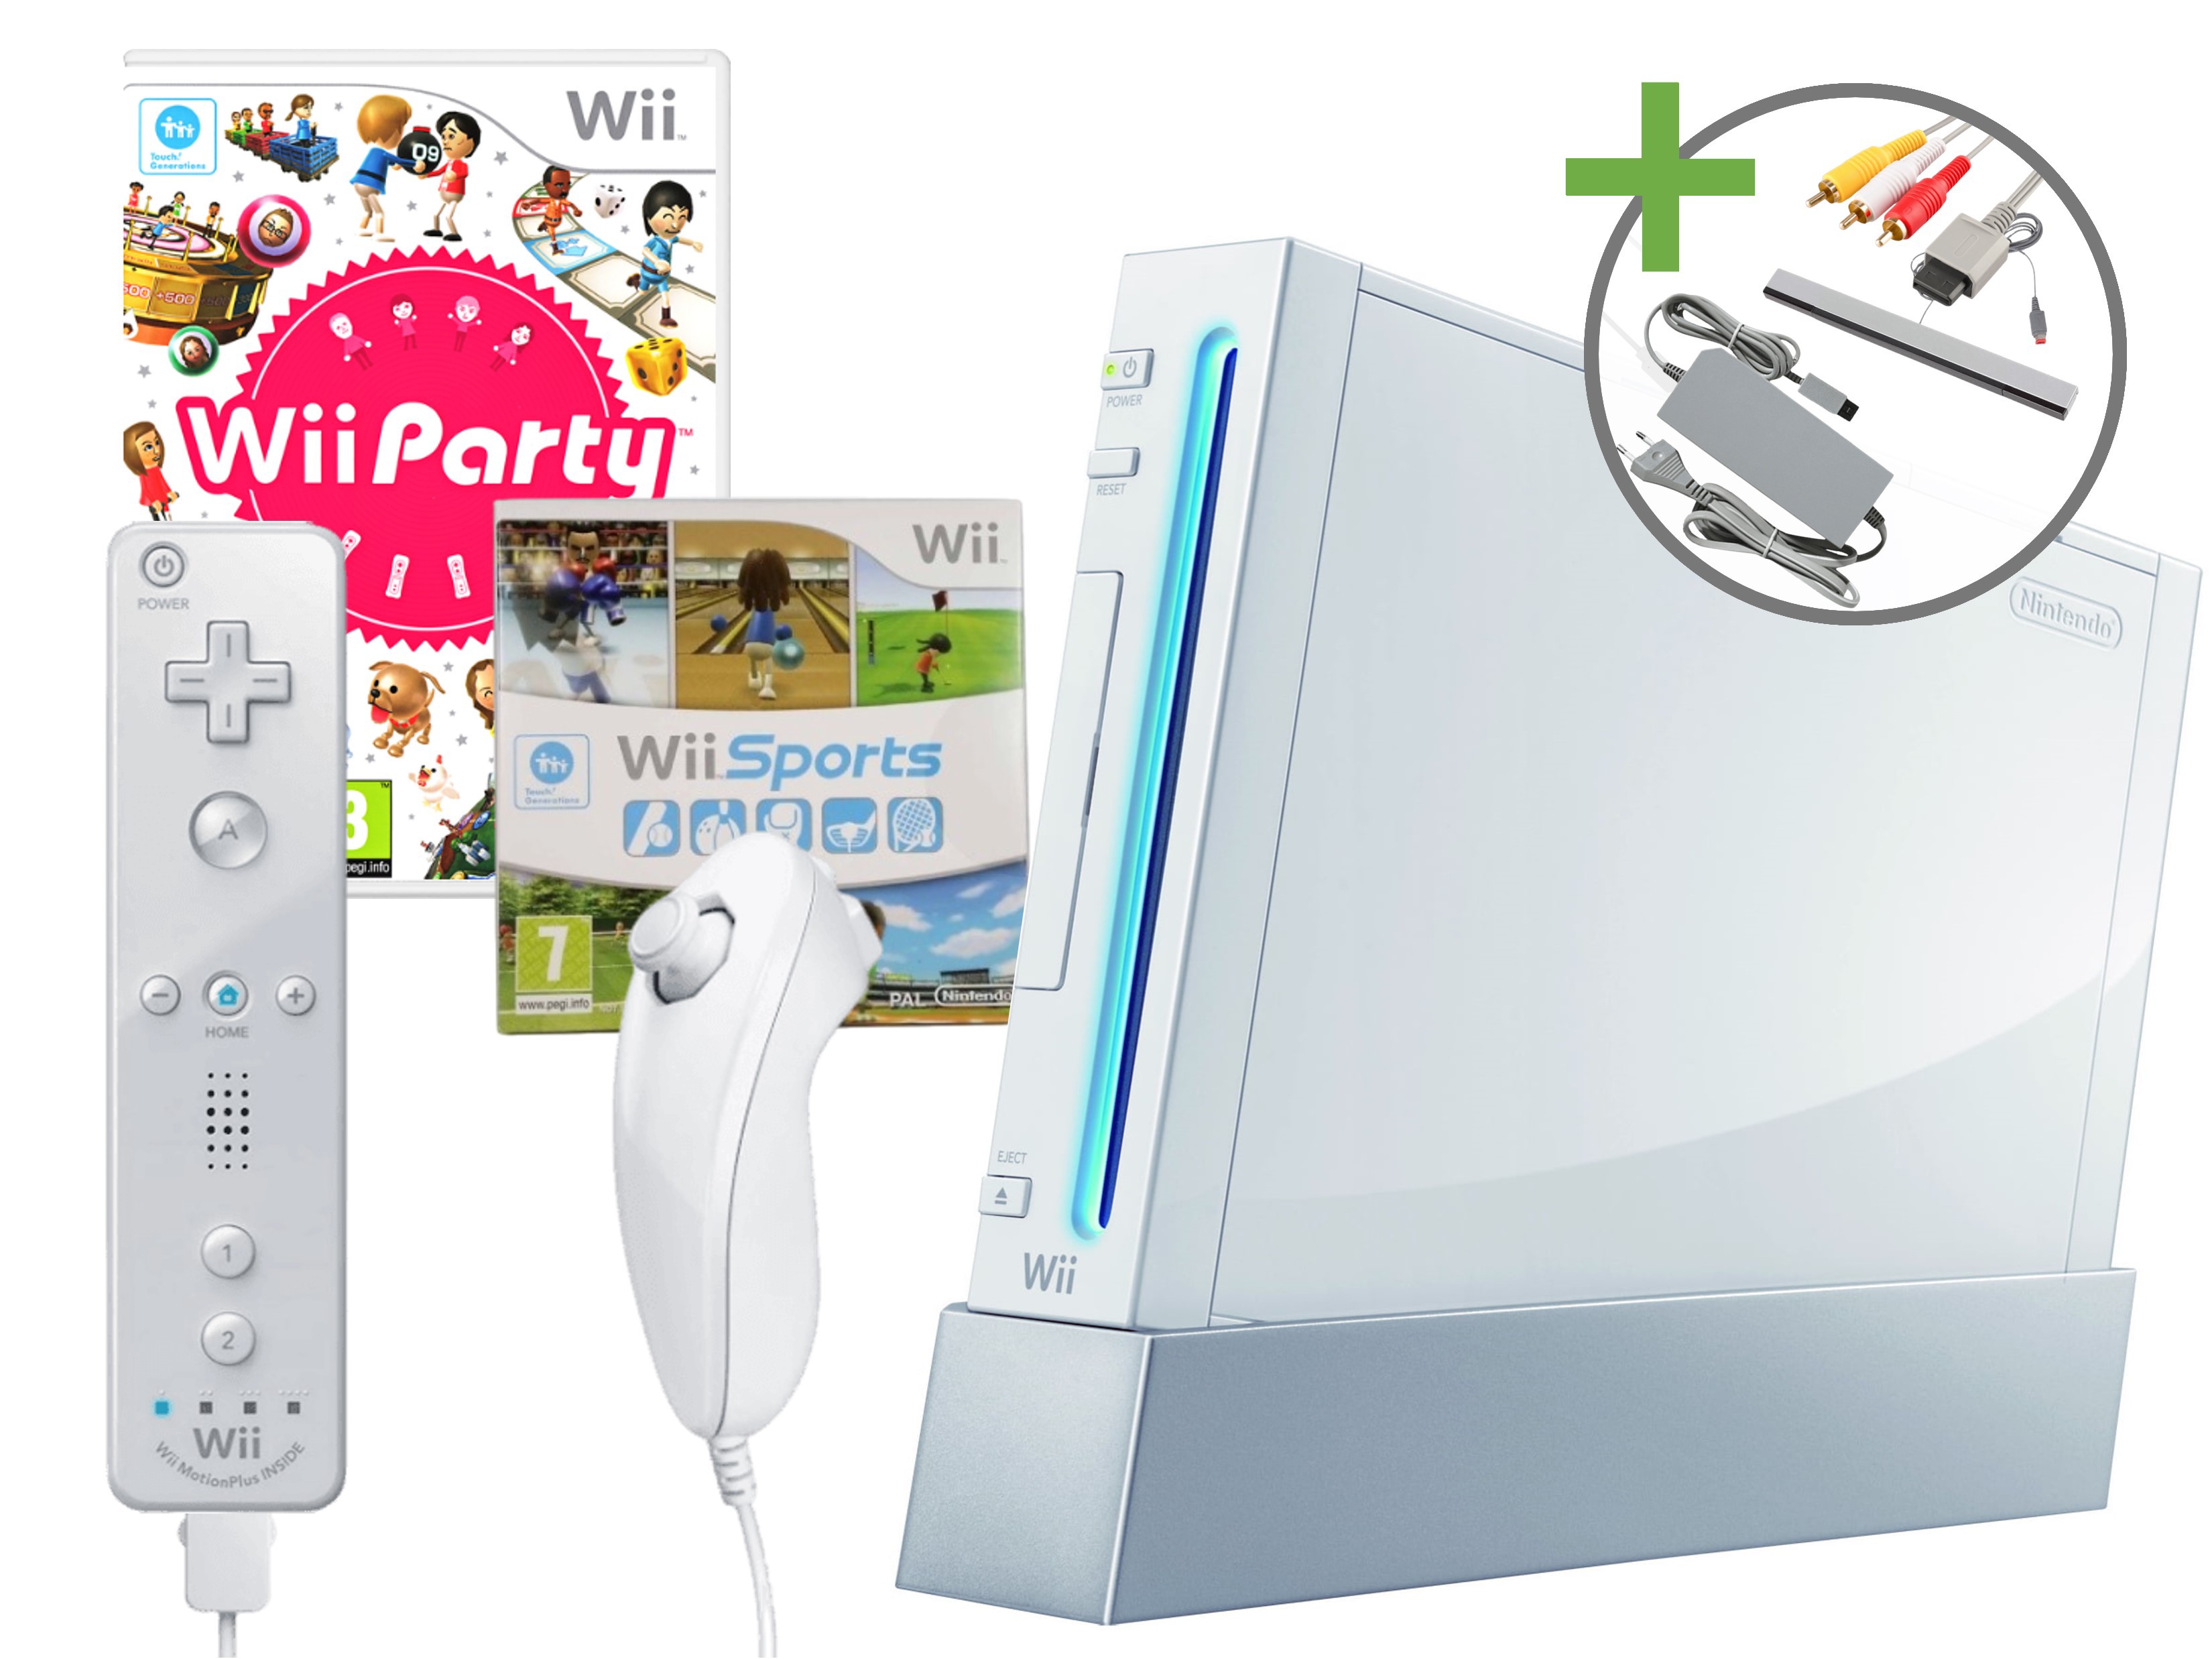 Nintendo Wii Starter Pack - Wii Family Edition - Wii Hardware